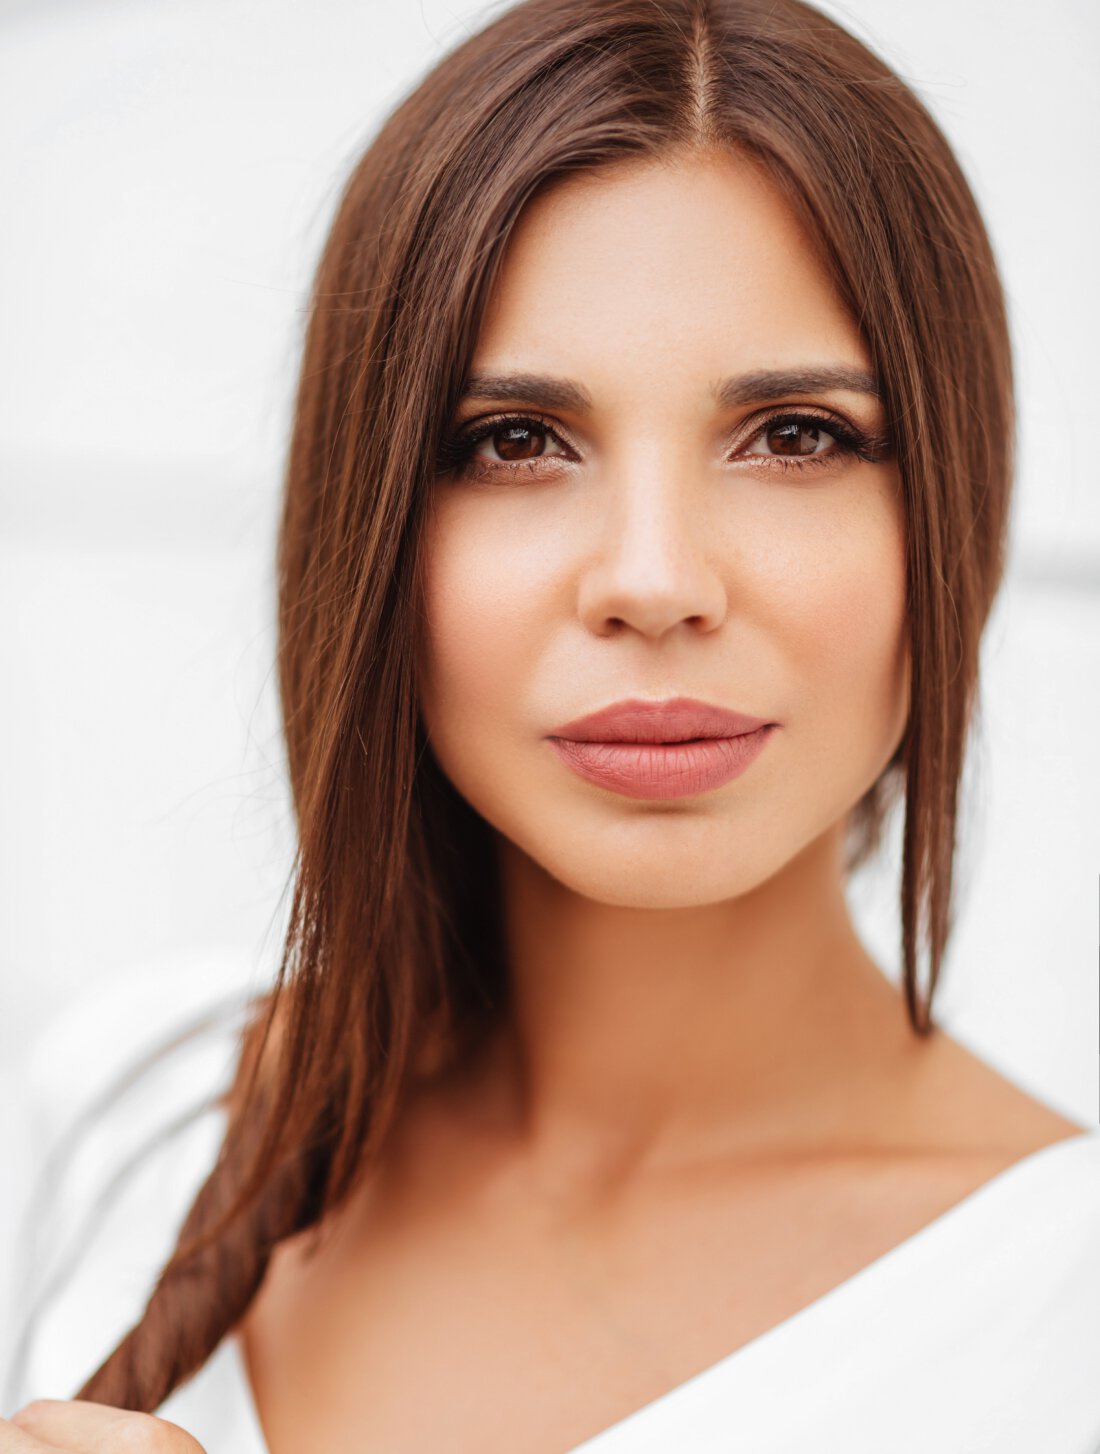 Manchester plastic surgery patient model with brown hair